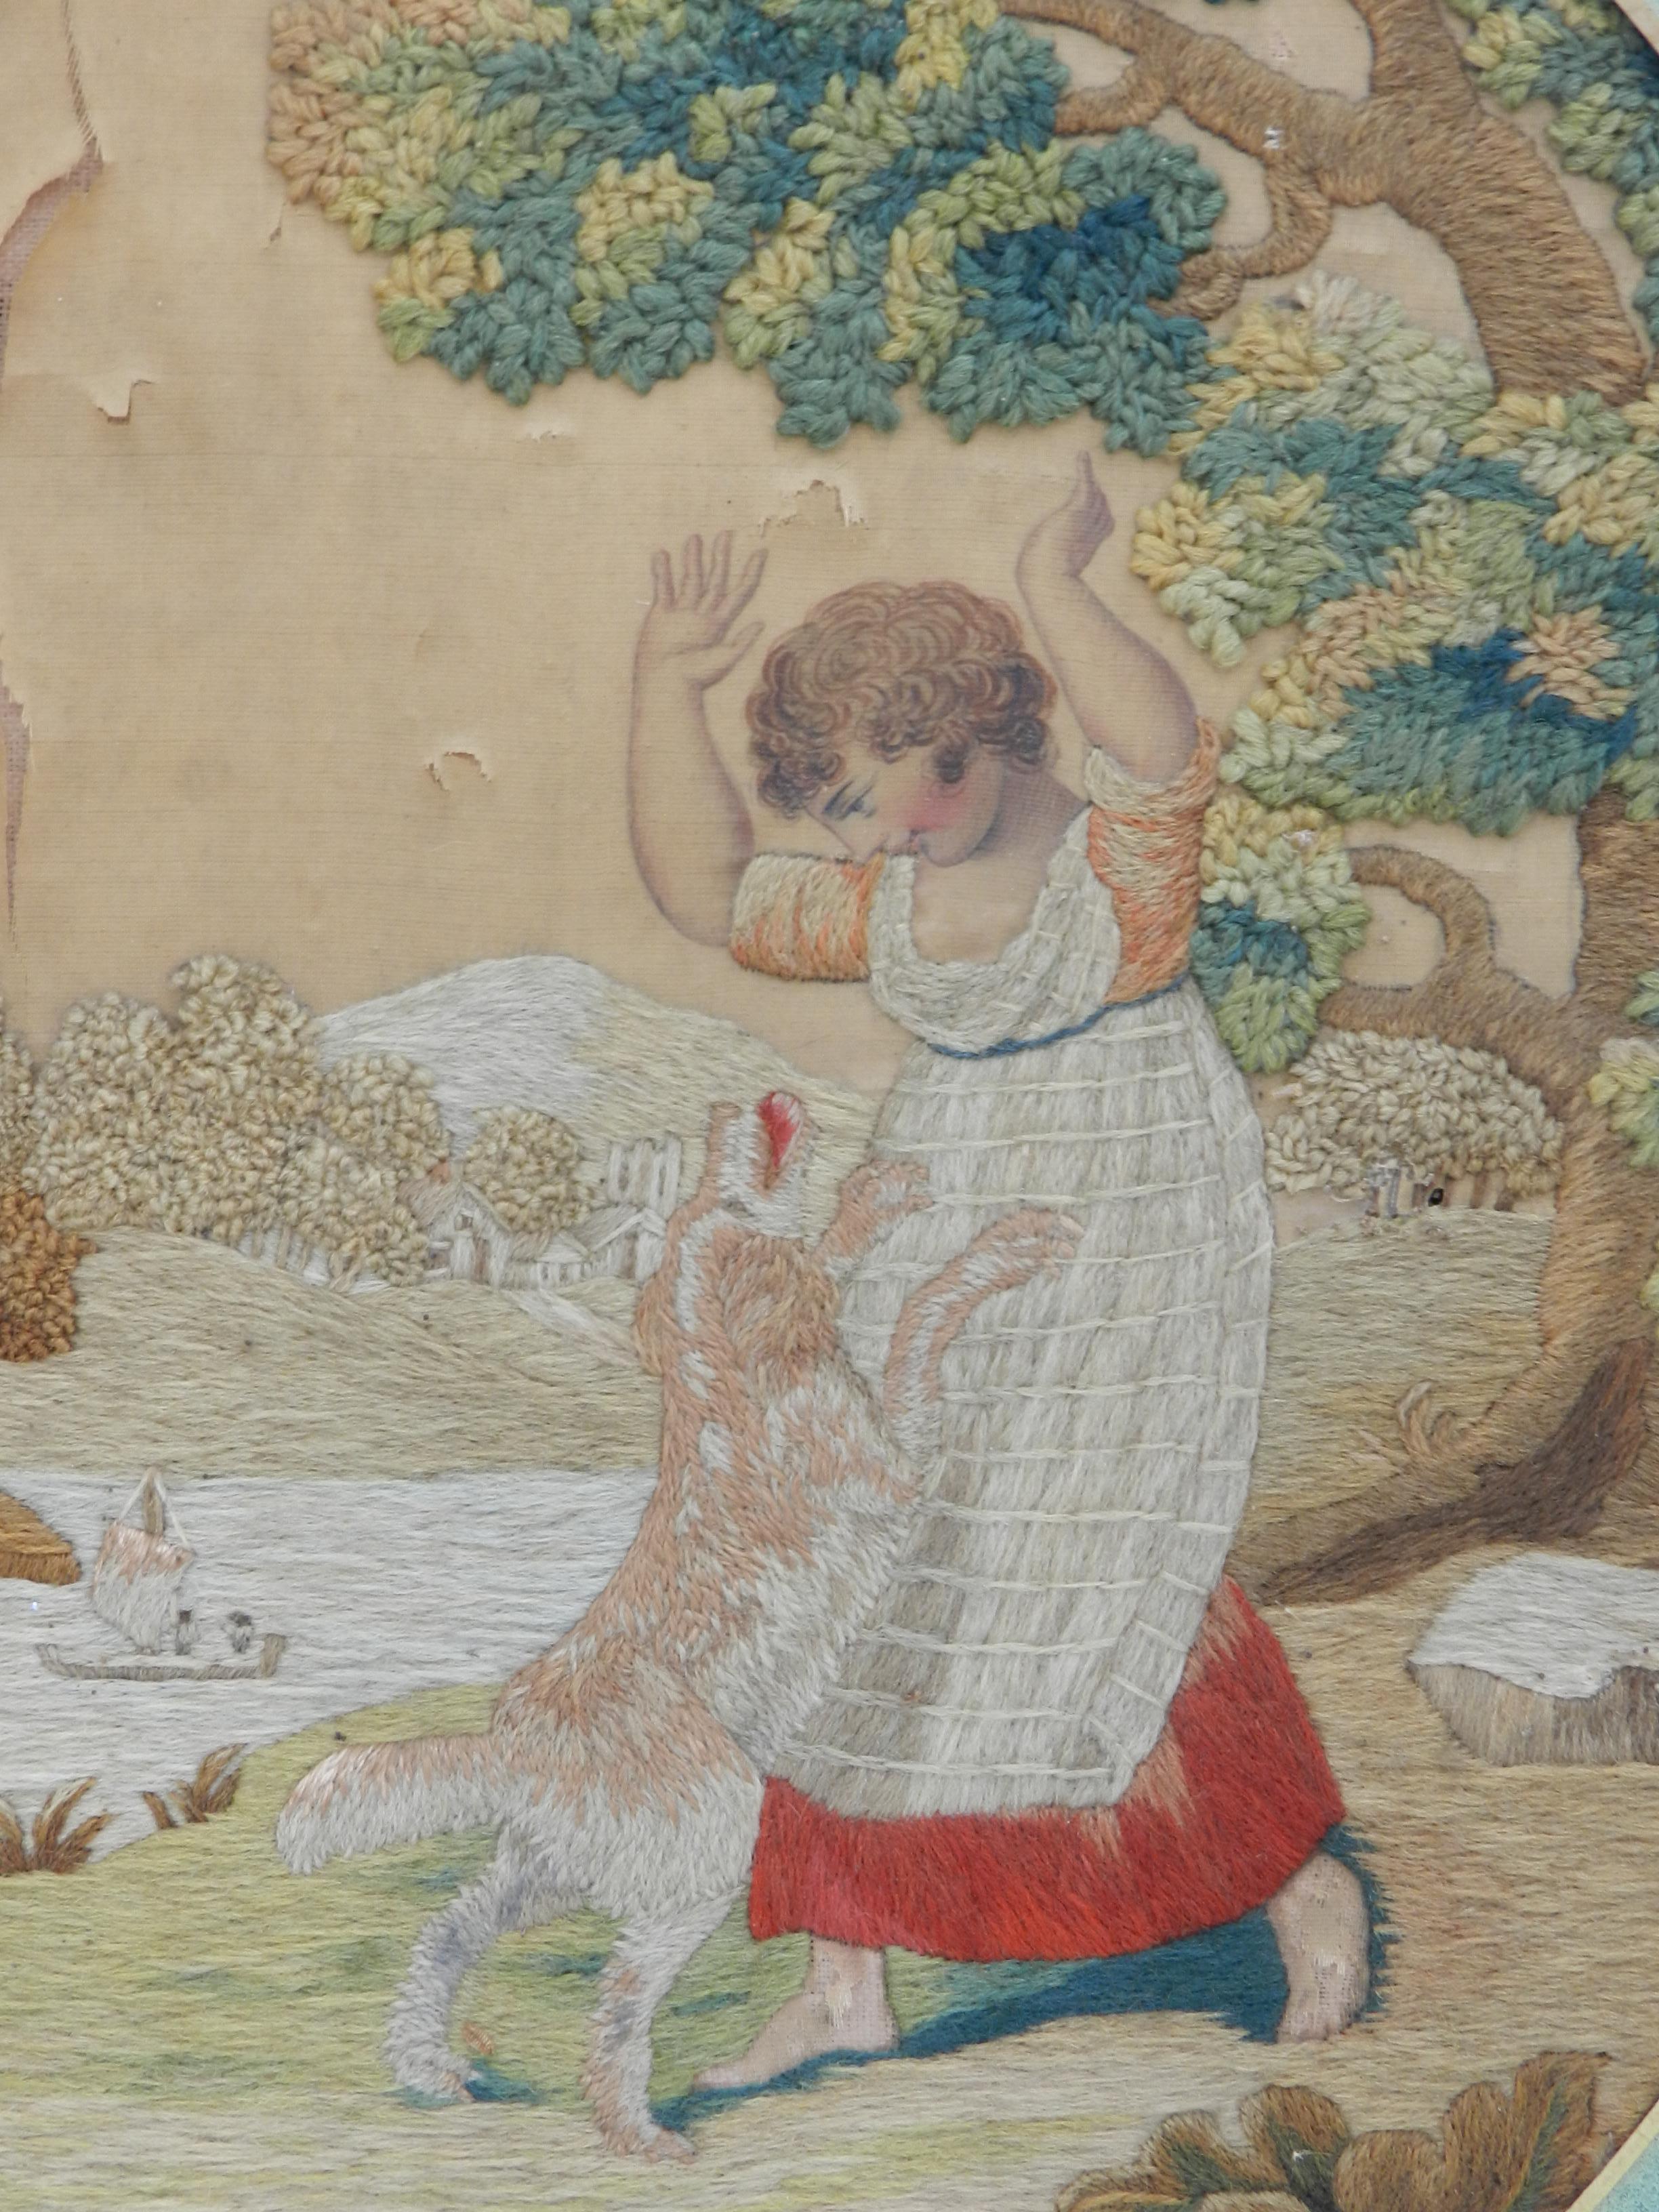 19th century dog and child tapestry French hand stitched needlepoint 
Lightly distressed with marks to background
It still has loads of charm 
Decorative embroidered woolwork petit point 
Unframed
Good antique condition for its age with minor signs